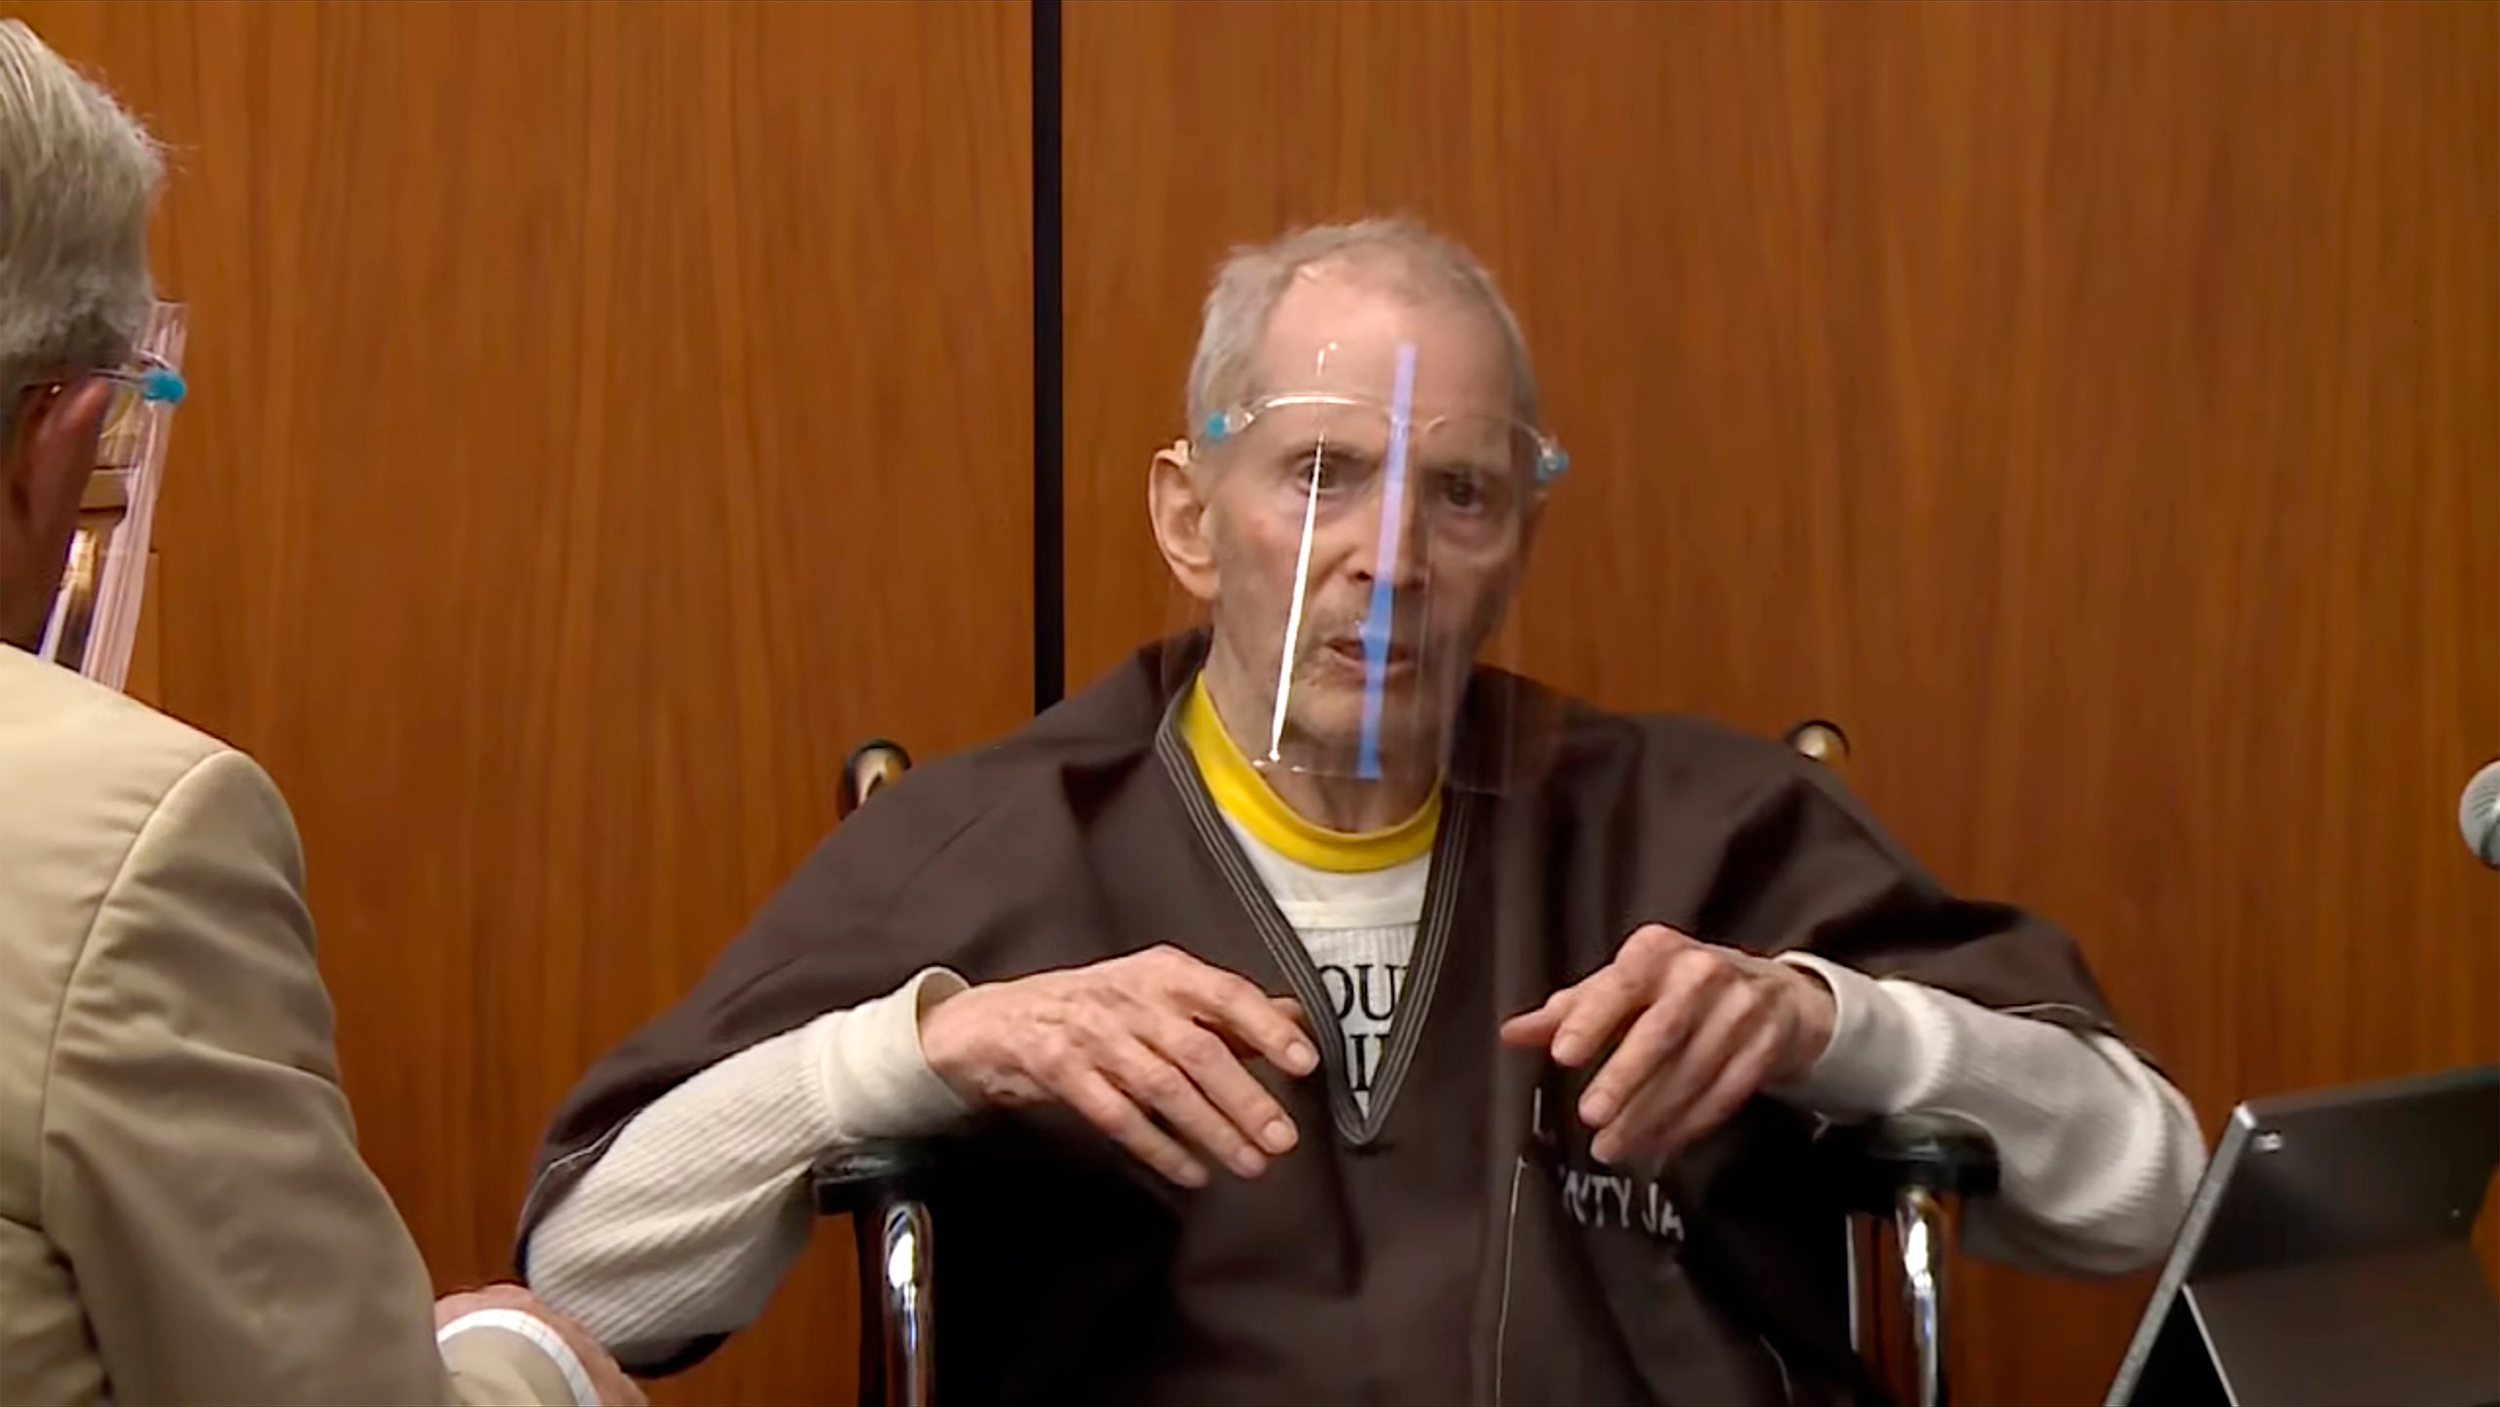 Millionaire Robert Durst answers questions while taking the stand during his murder trial on August 9 in Los Angeles County Superior Court in Inglewood, California. 